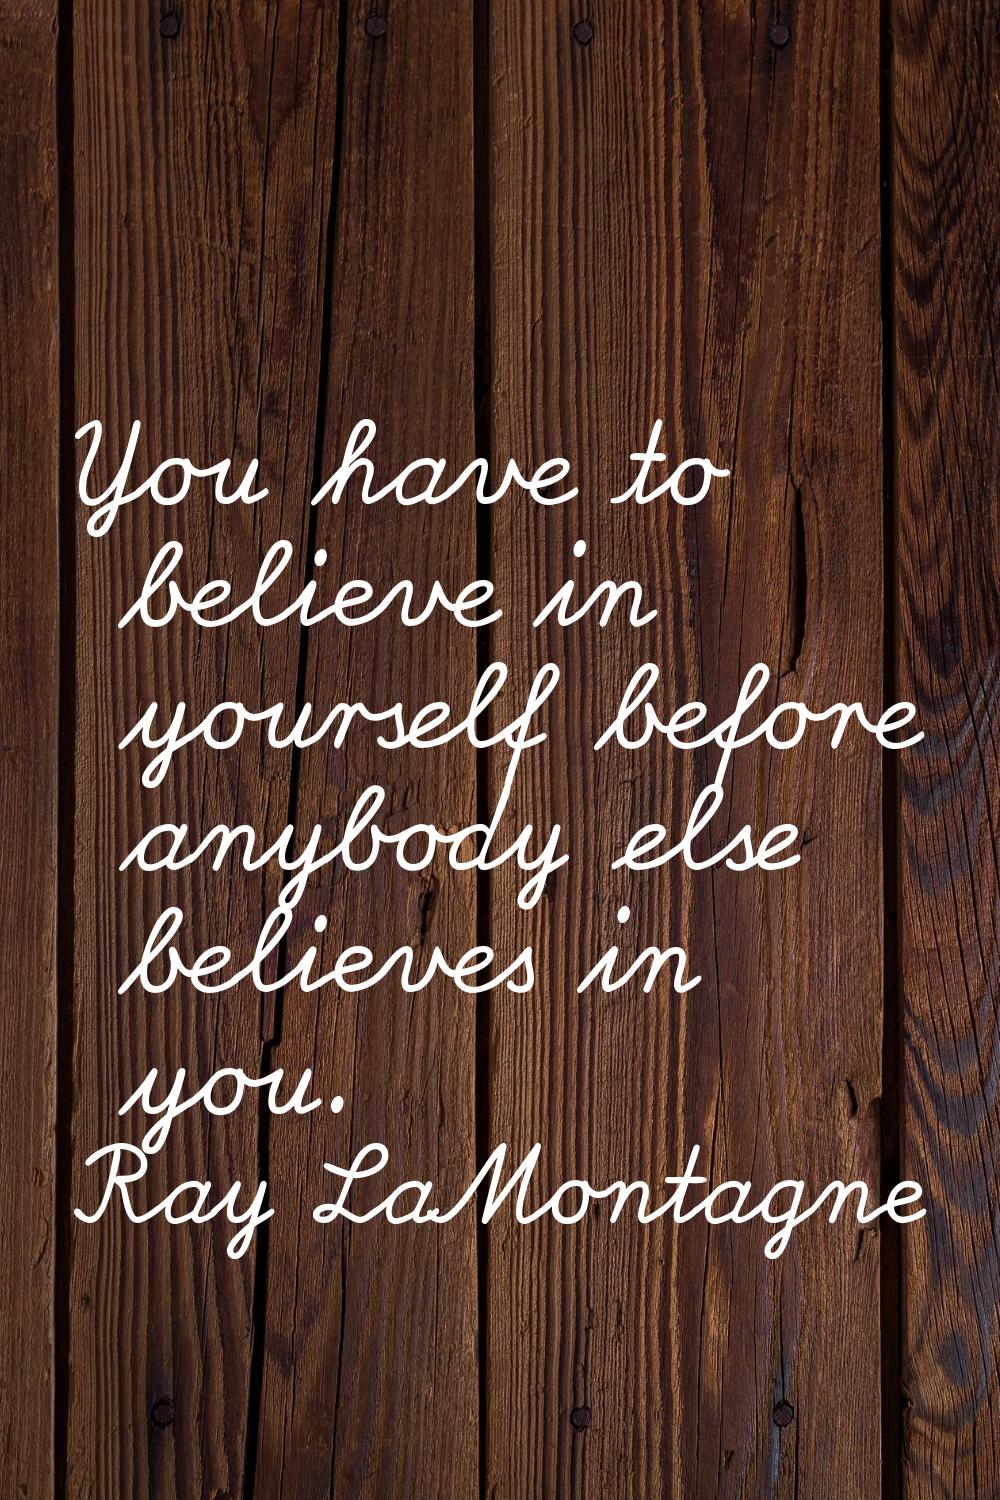 You have to believe in yourself before anybody else believes in you.